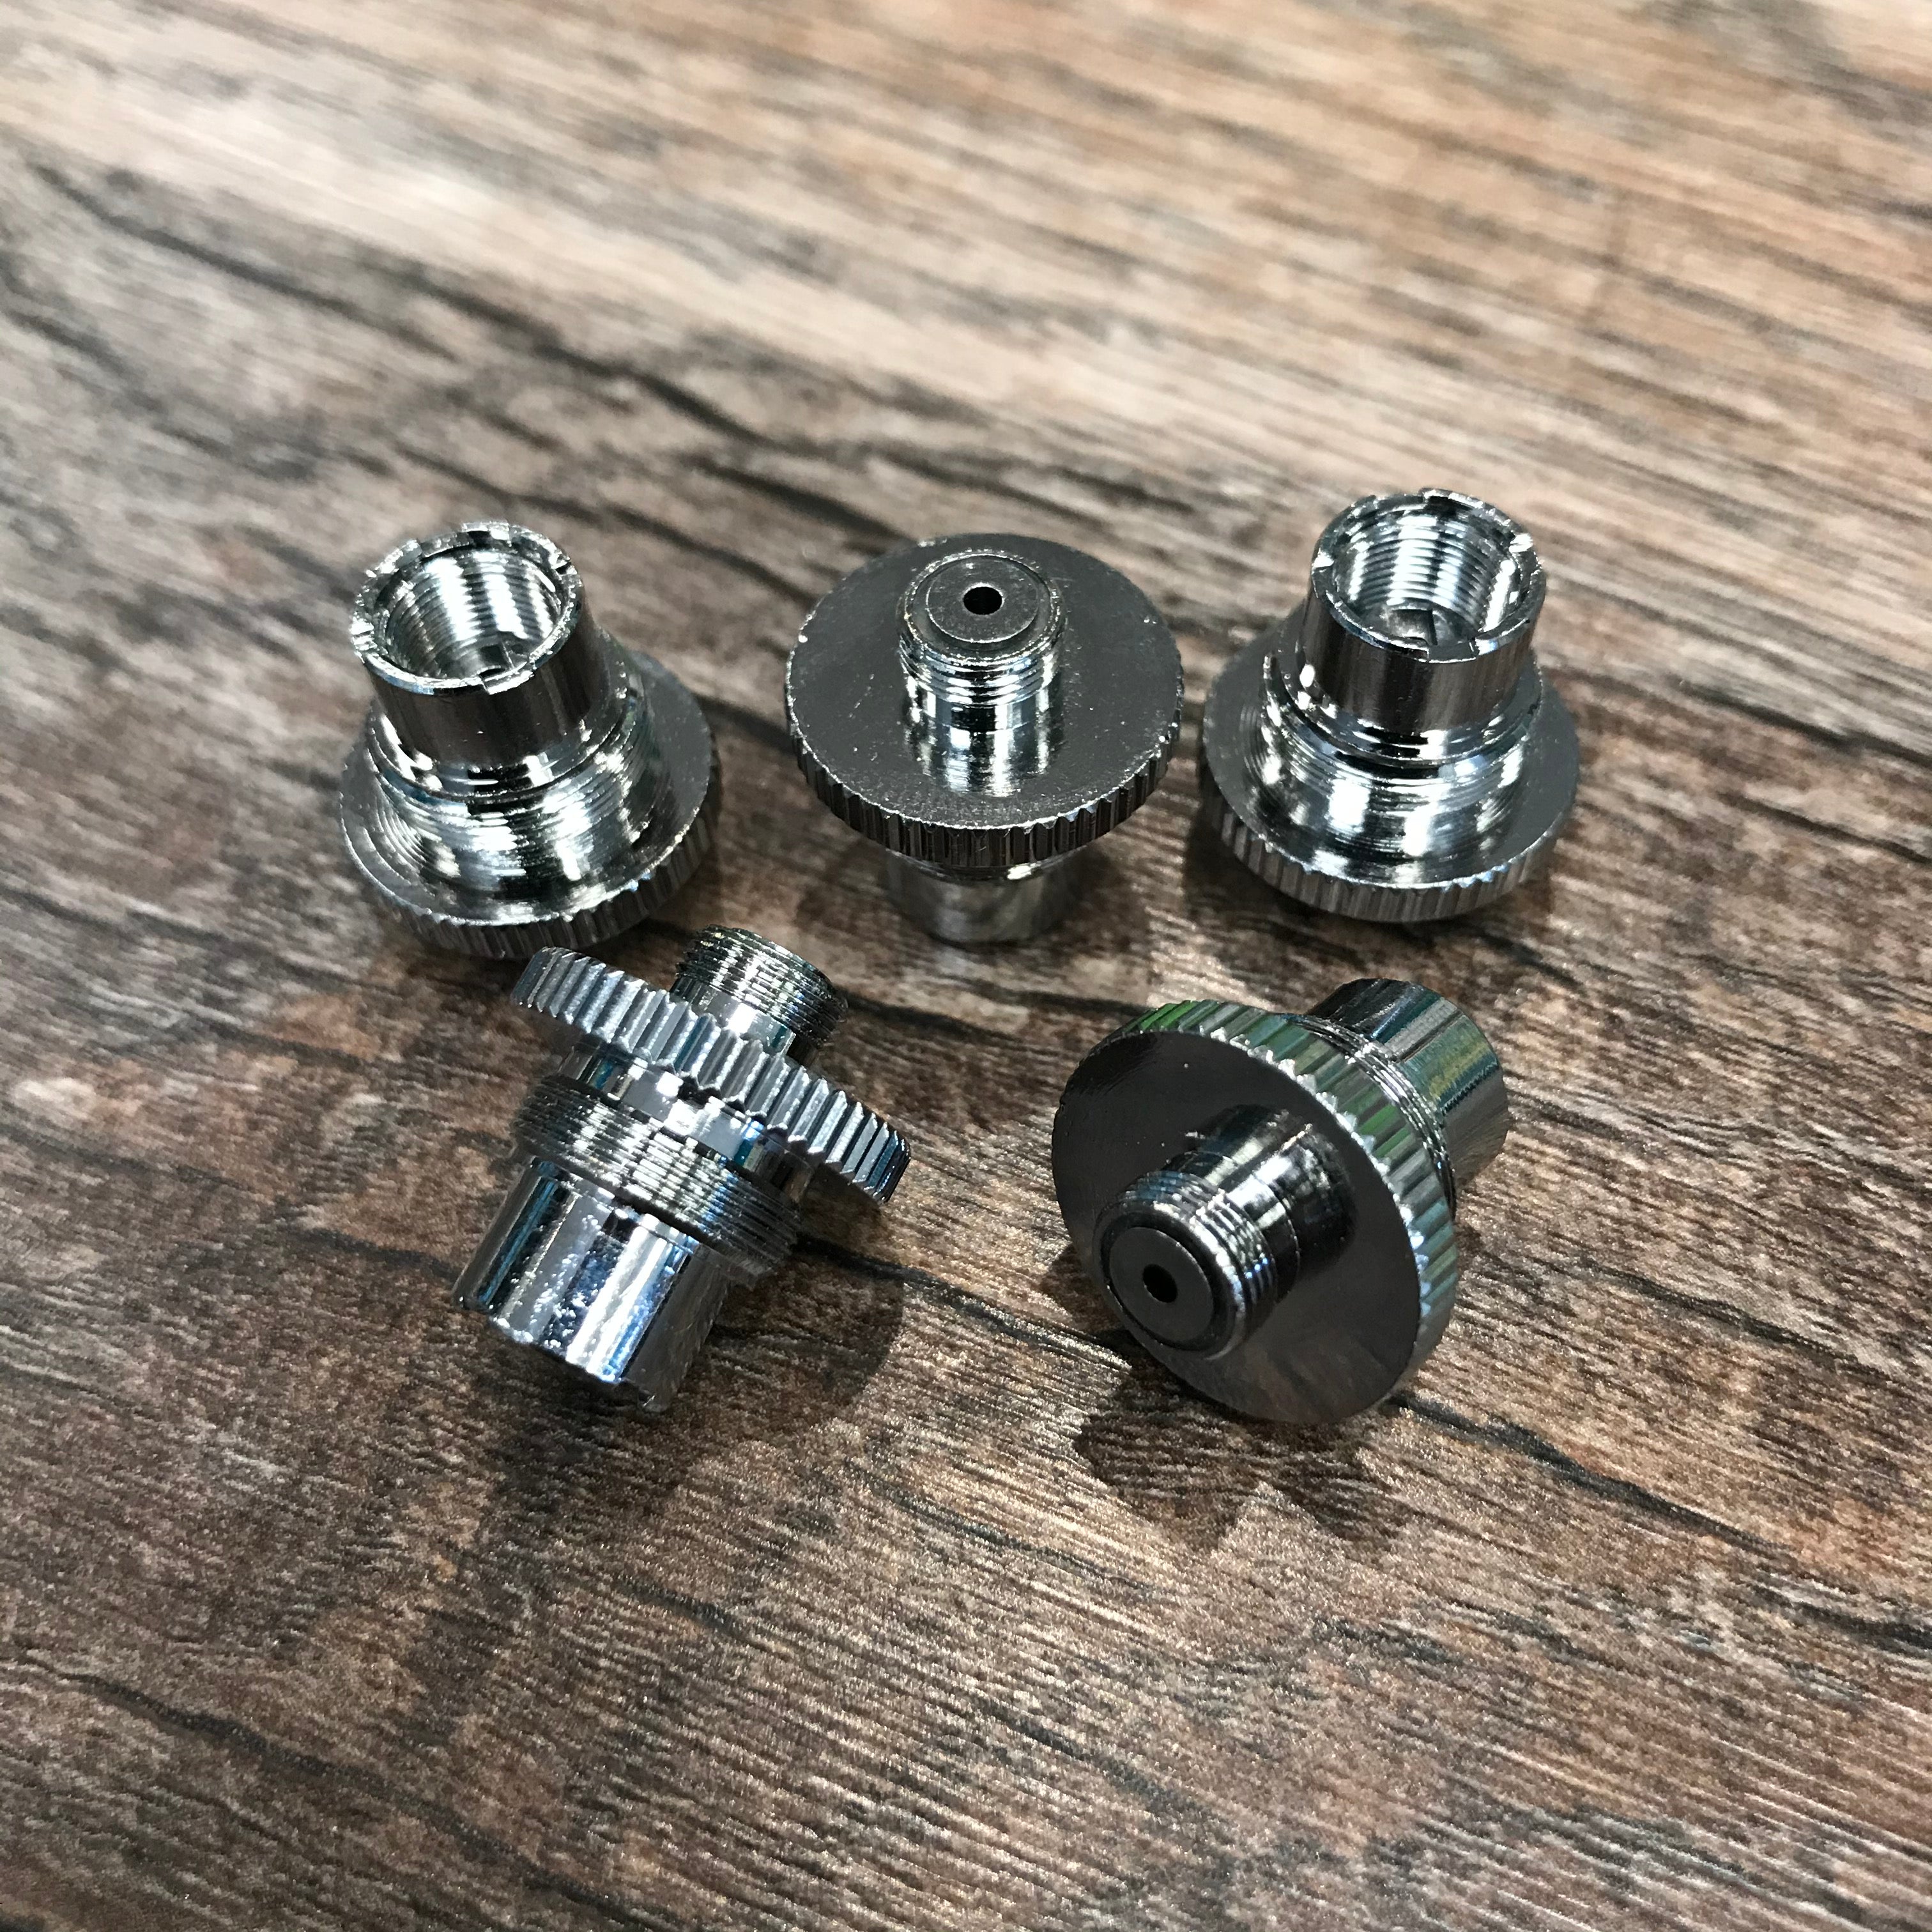 510 Thread to eGO Adapter